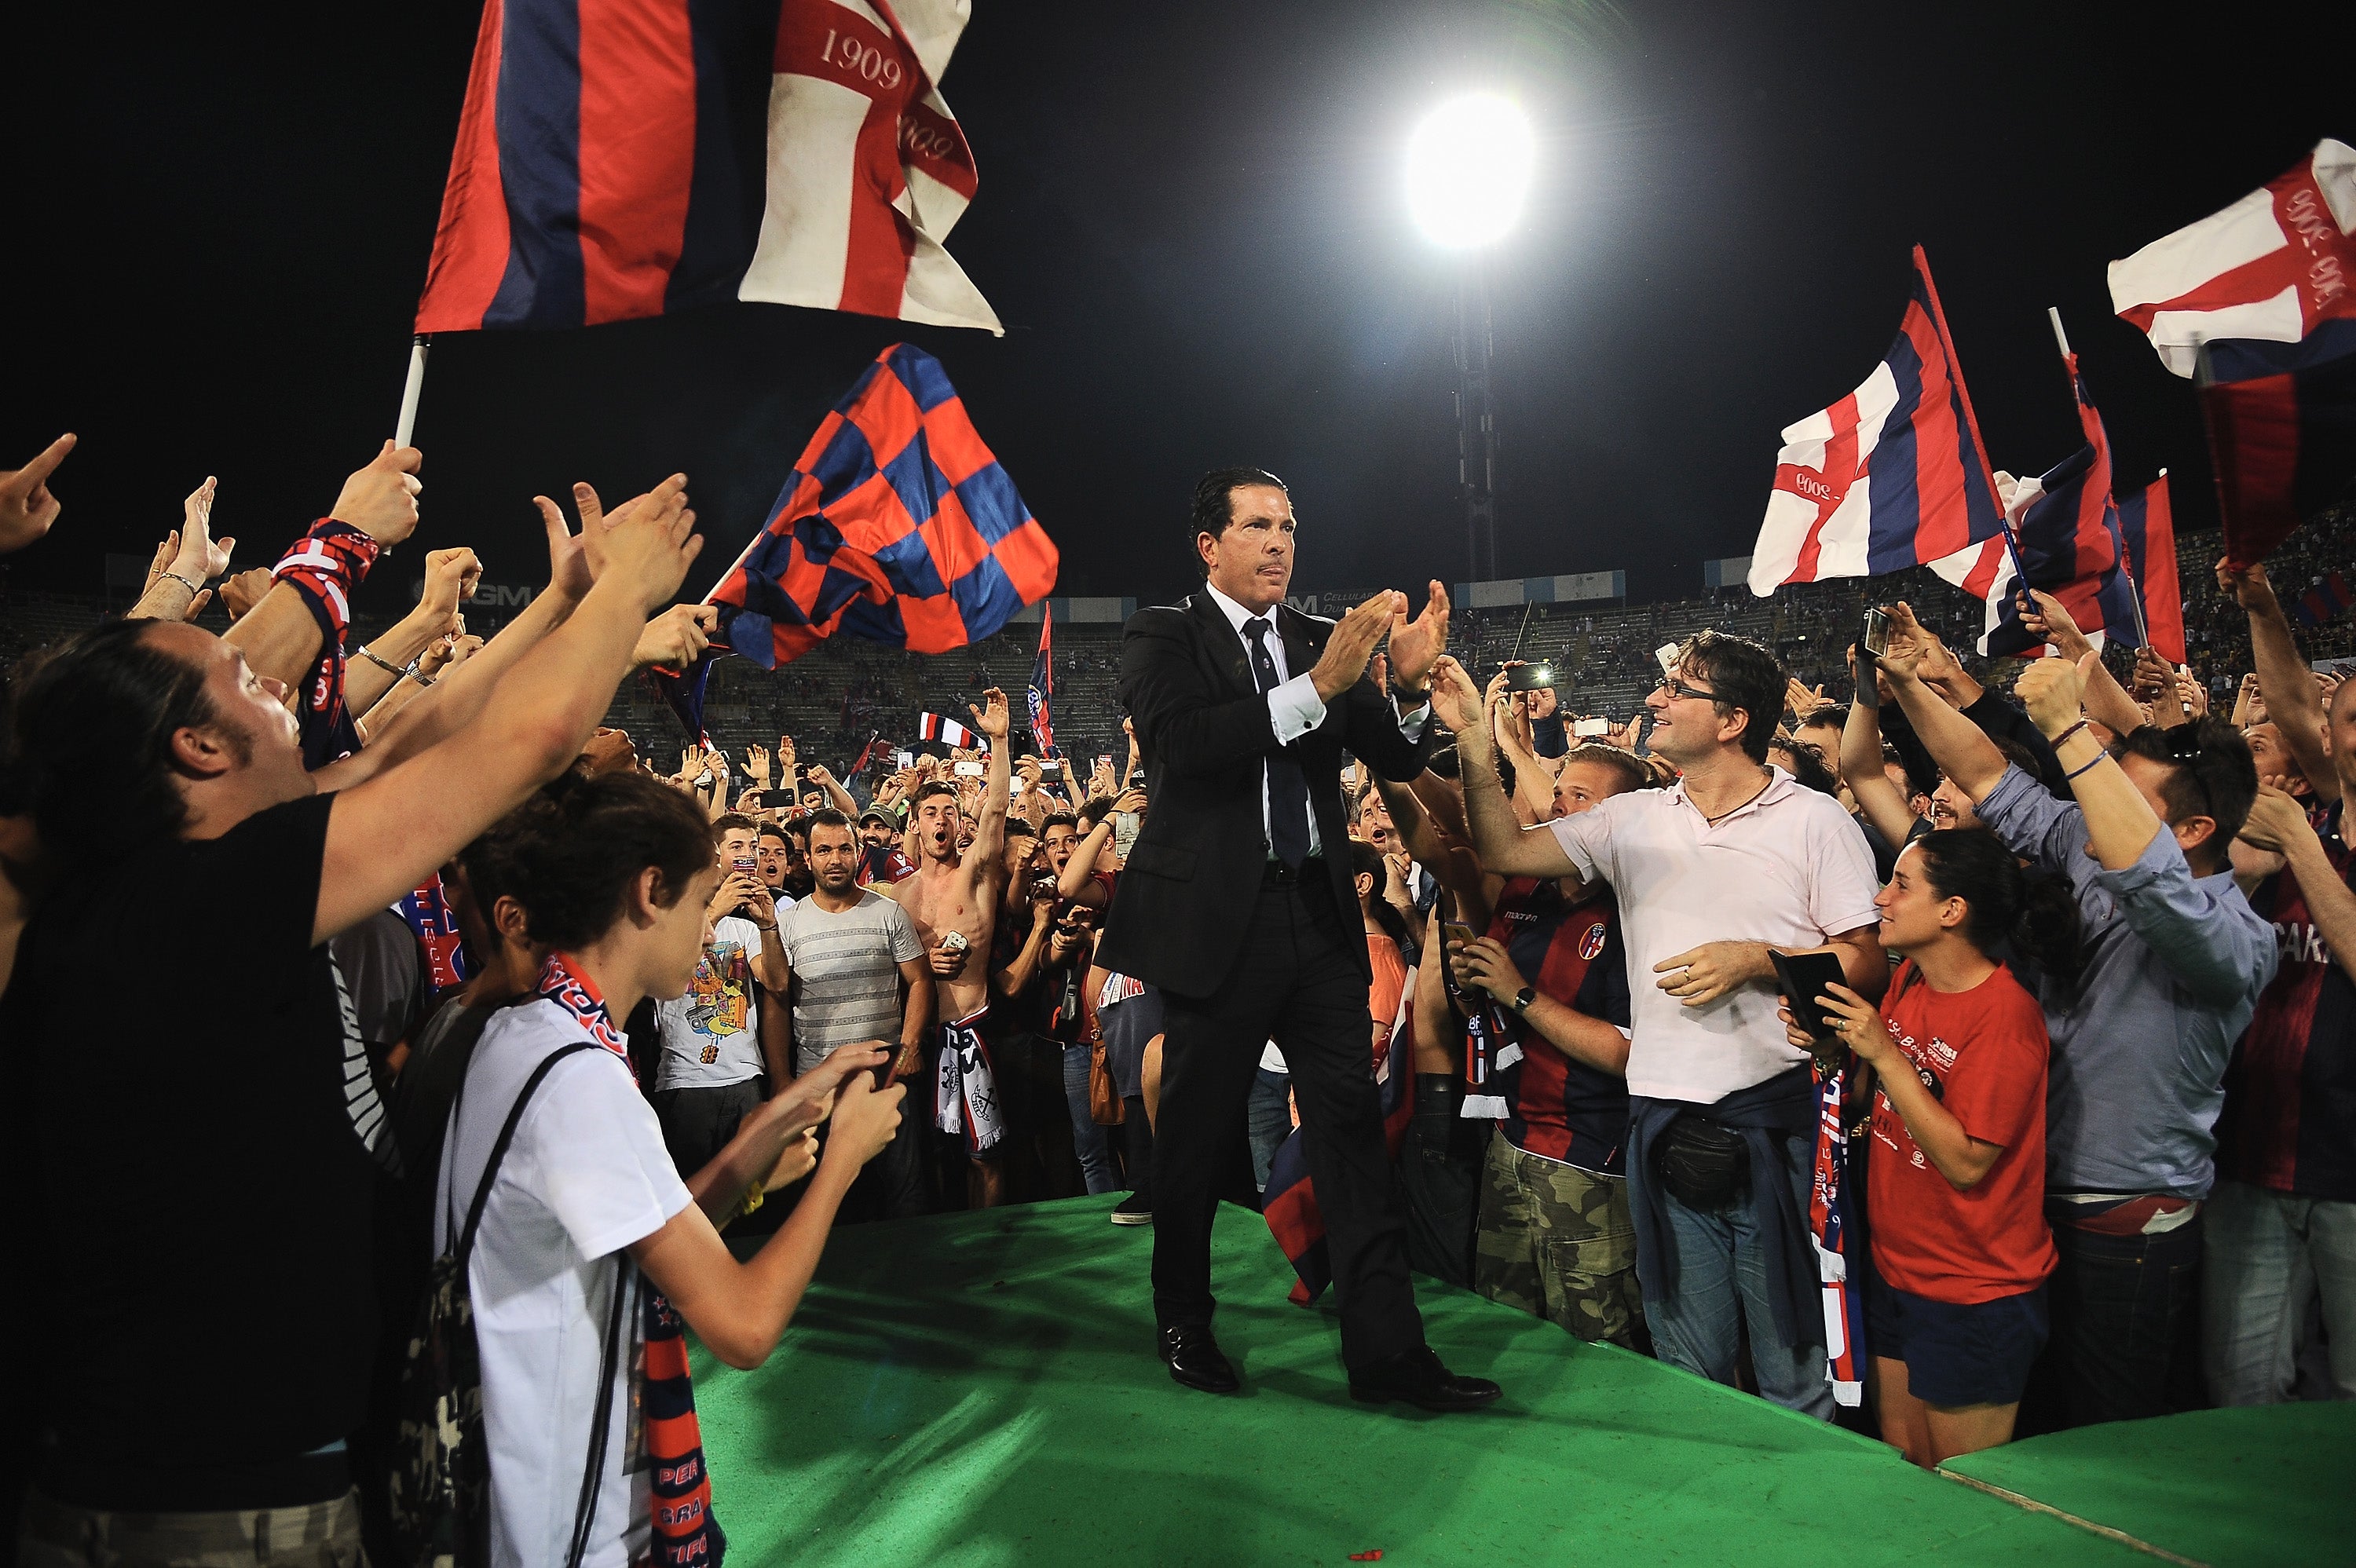 Tacopina, as president of Bologna FC, celebrates with supporters at the end of the Serie B play-off final match between Bologna FC and Pescara Calcio at Stadio Renato Dall’Ara on June 9, 2015